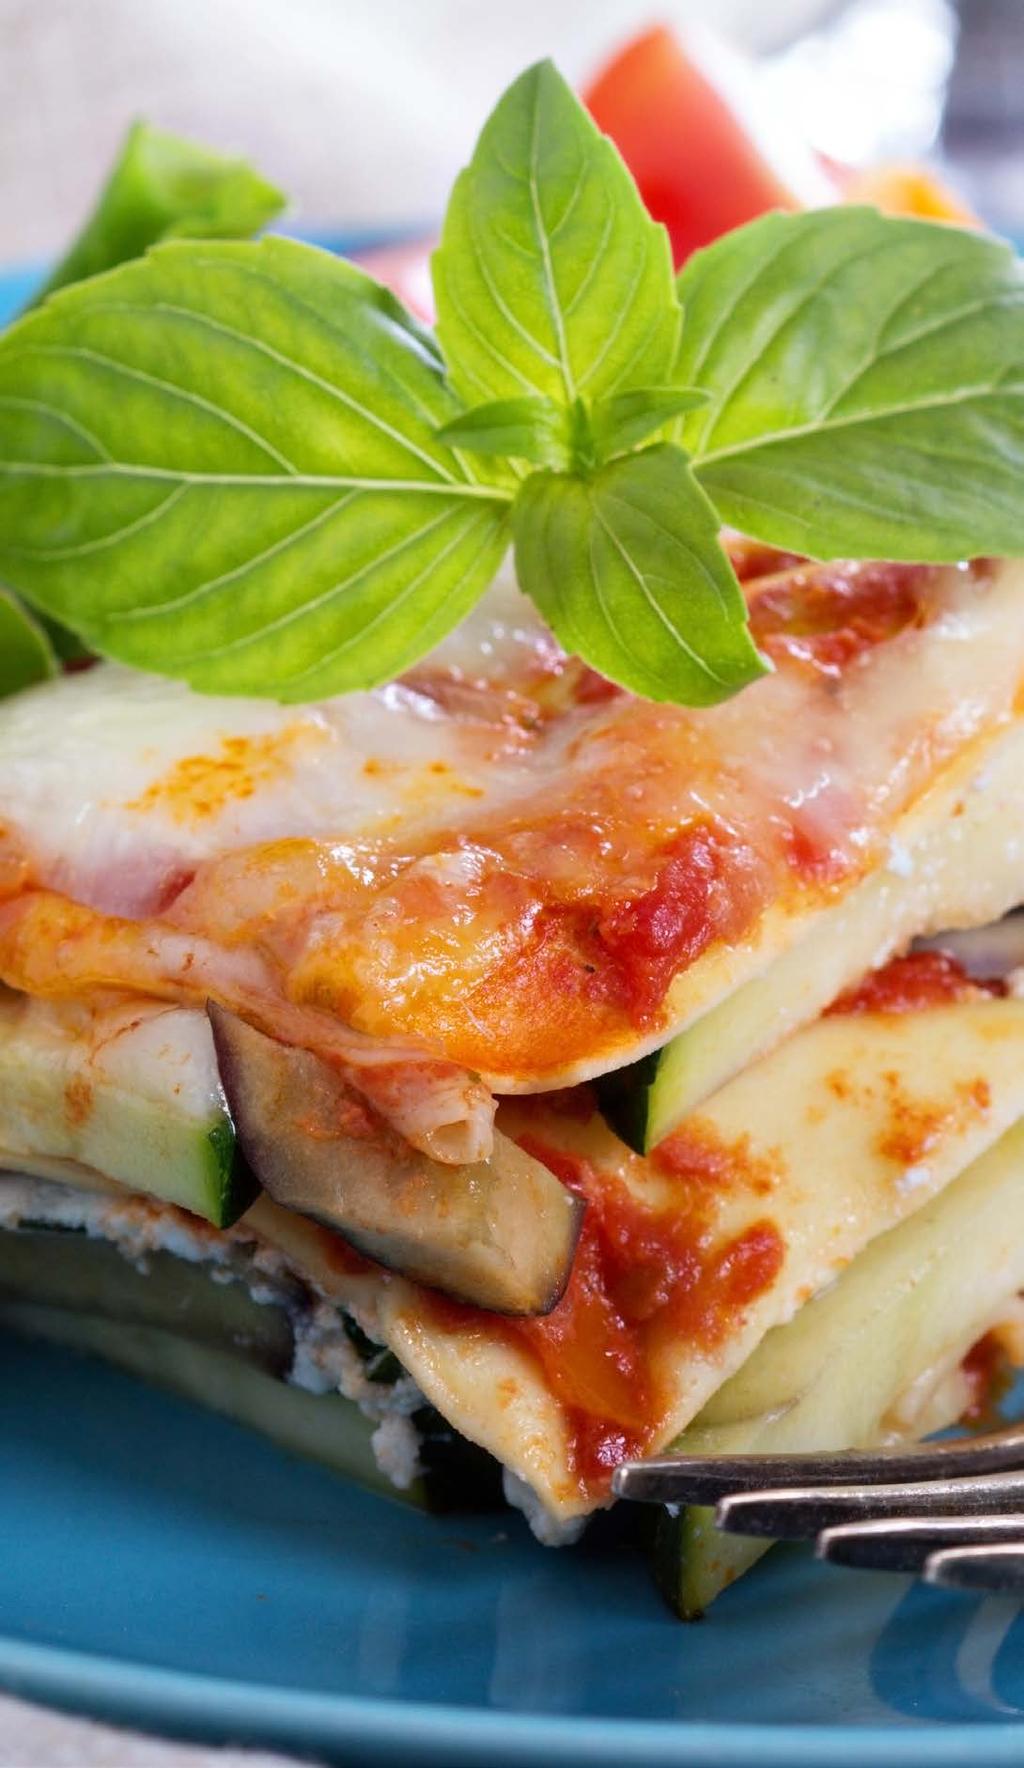 Dinner Spinach Zucchini and Ricotta Lasagna in a Bowl Fresh lasagna sheets (can be found in refrigerated section of grocery store) 2 1/2 cups (75g) baby spinach, roughly chopped 1/4 medium zucchini,